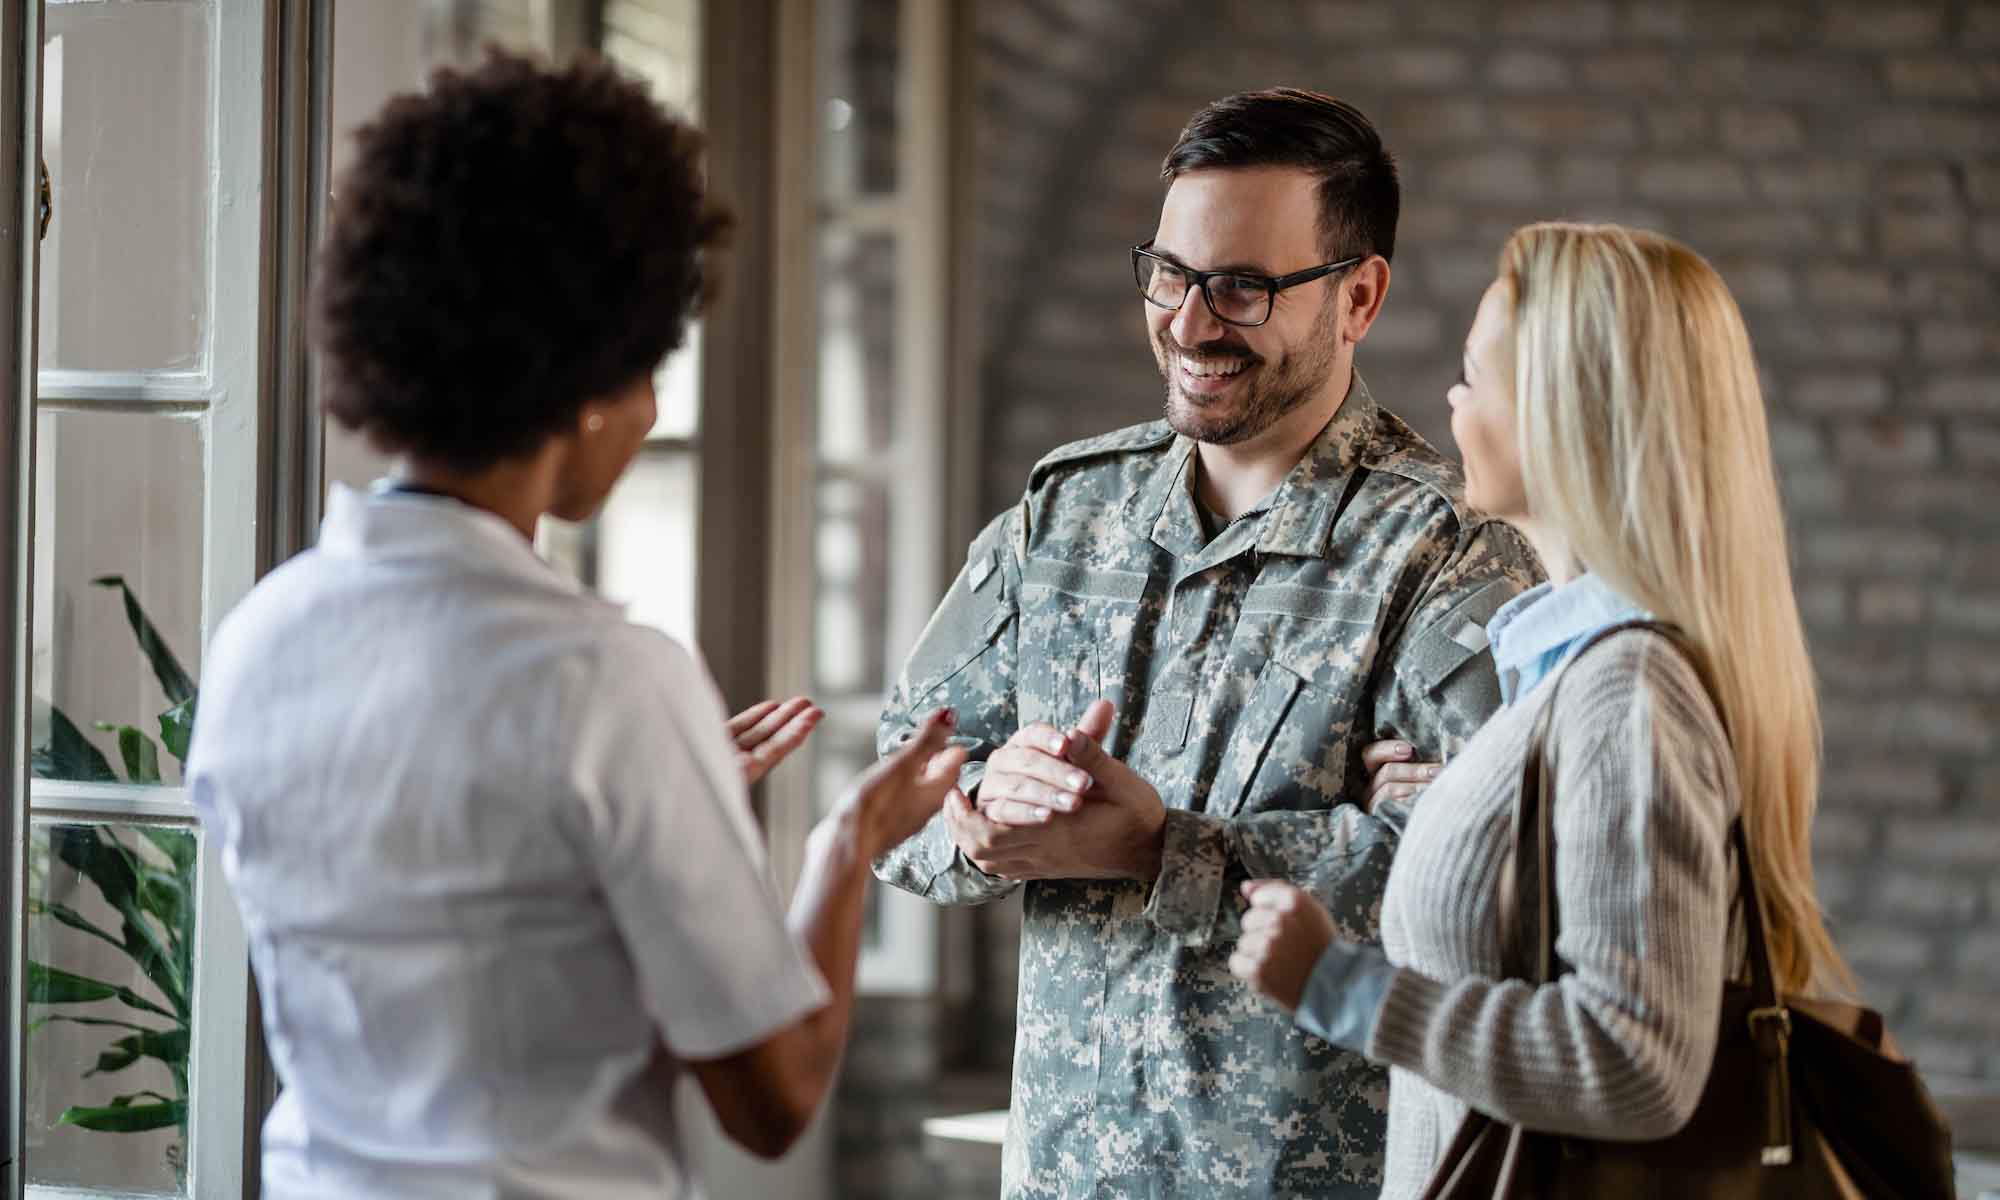 Military man conversing with two other people